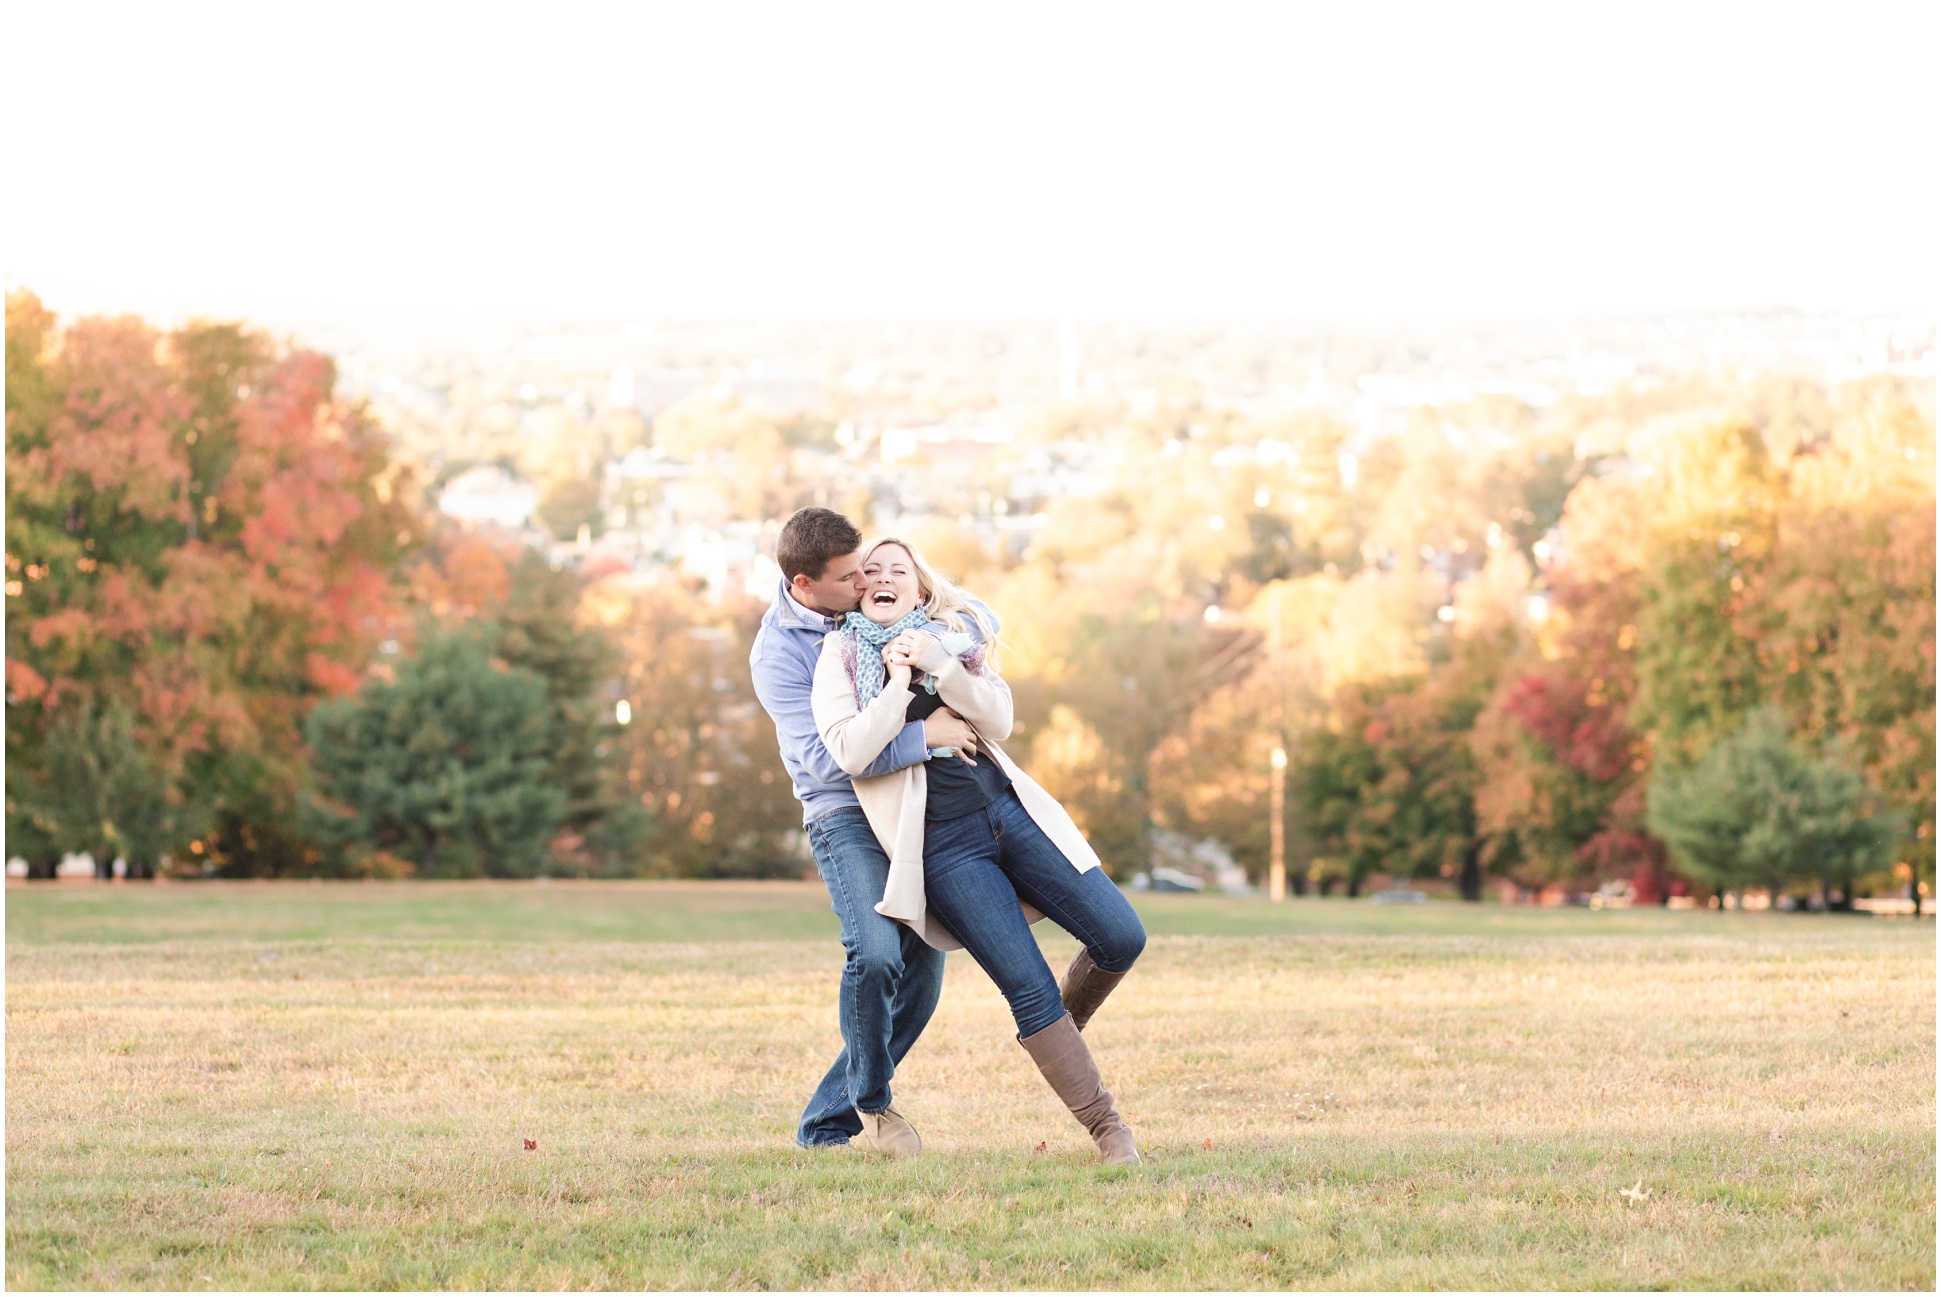 Couple twirling in open field during autumn